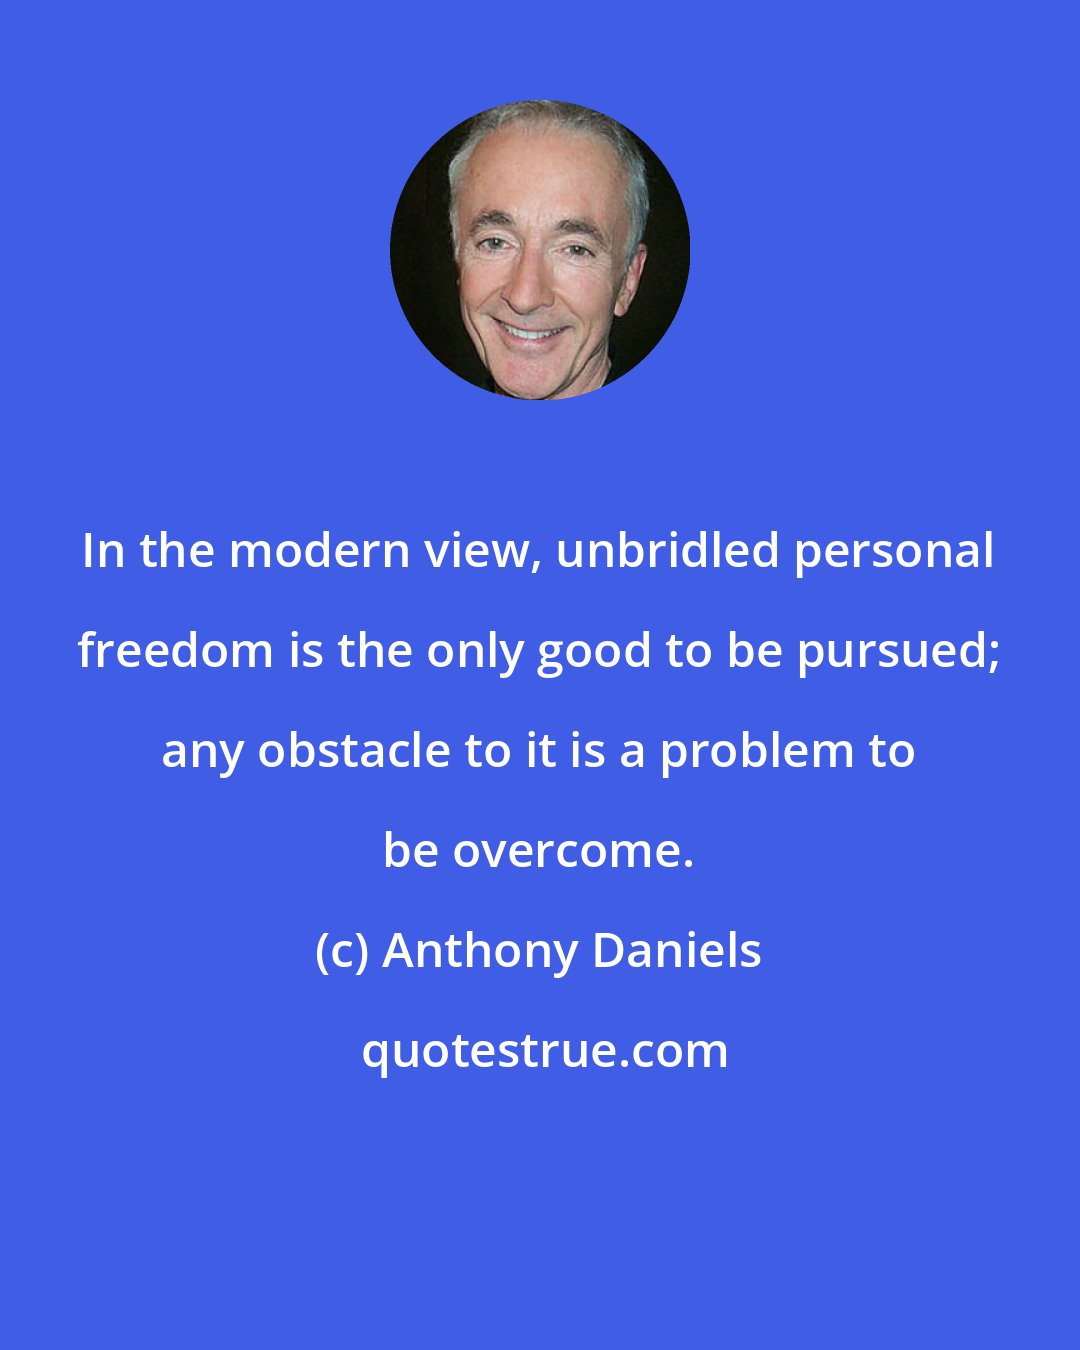 Anthony Daniels: In the modern view, unbridled personal freedom is the only good to be pursued; any obstacle to it is a problem to be overcome.